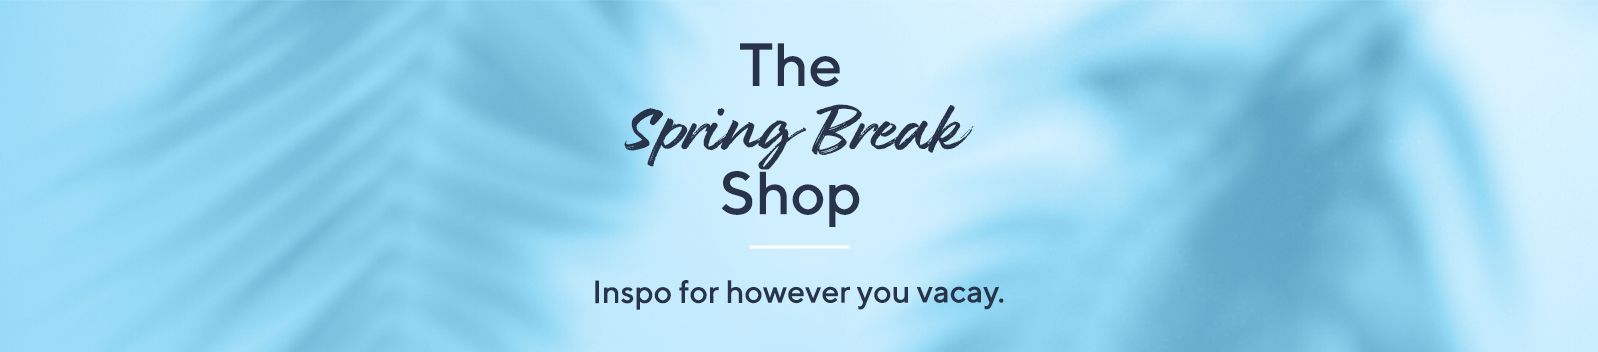 The Spring Break Shop.  Inspo for however you vacay.